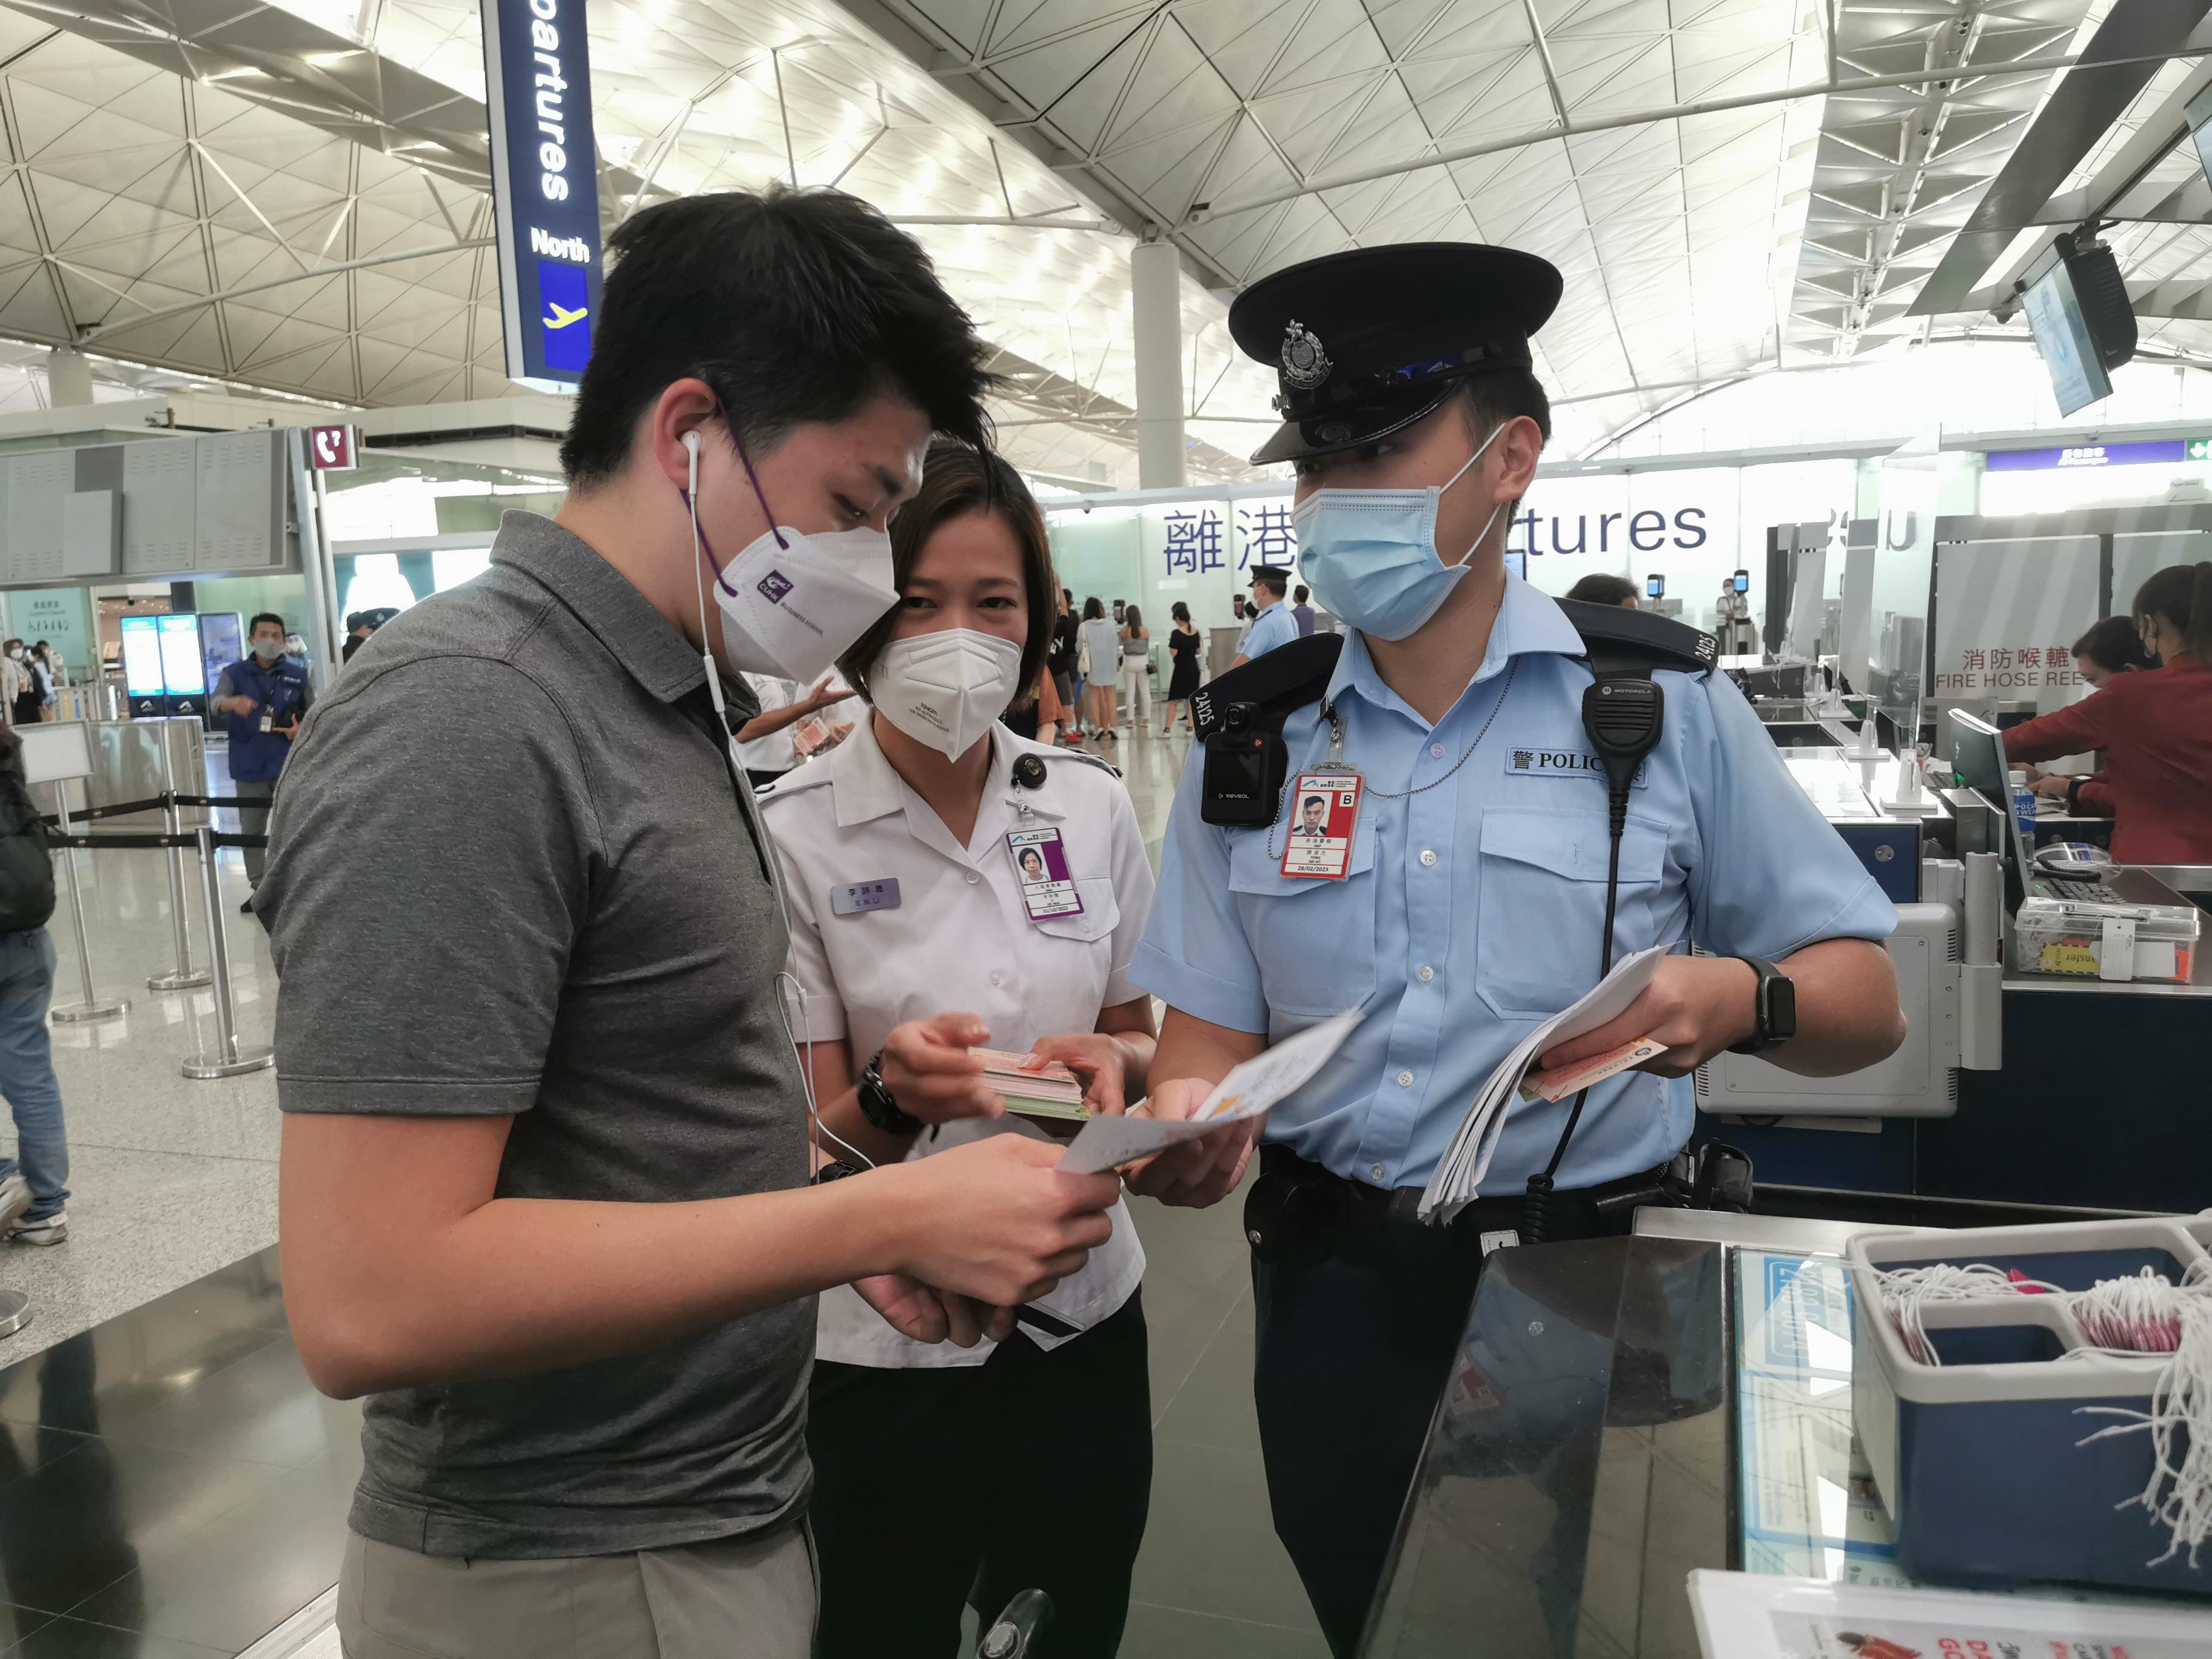 Officers of the Hong Kong Police Force and the Immigration Services Department today (August 18) distribute leaflets at the check-in service counters of the Hong Kong International Airport, to remind travellers to be vigilant against employment fraud and outbound travel safety.